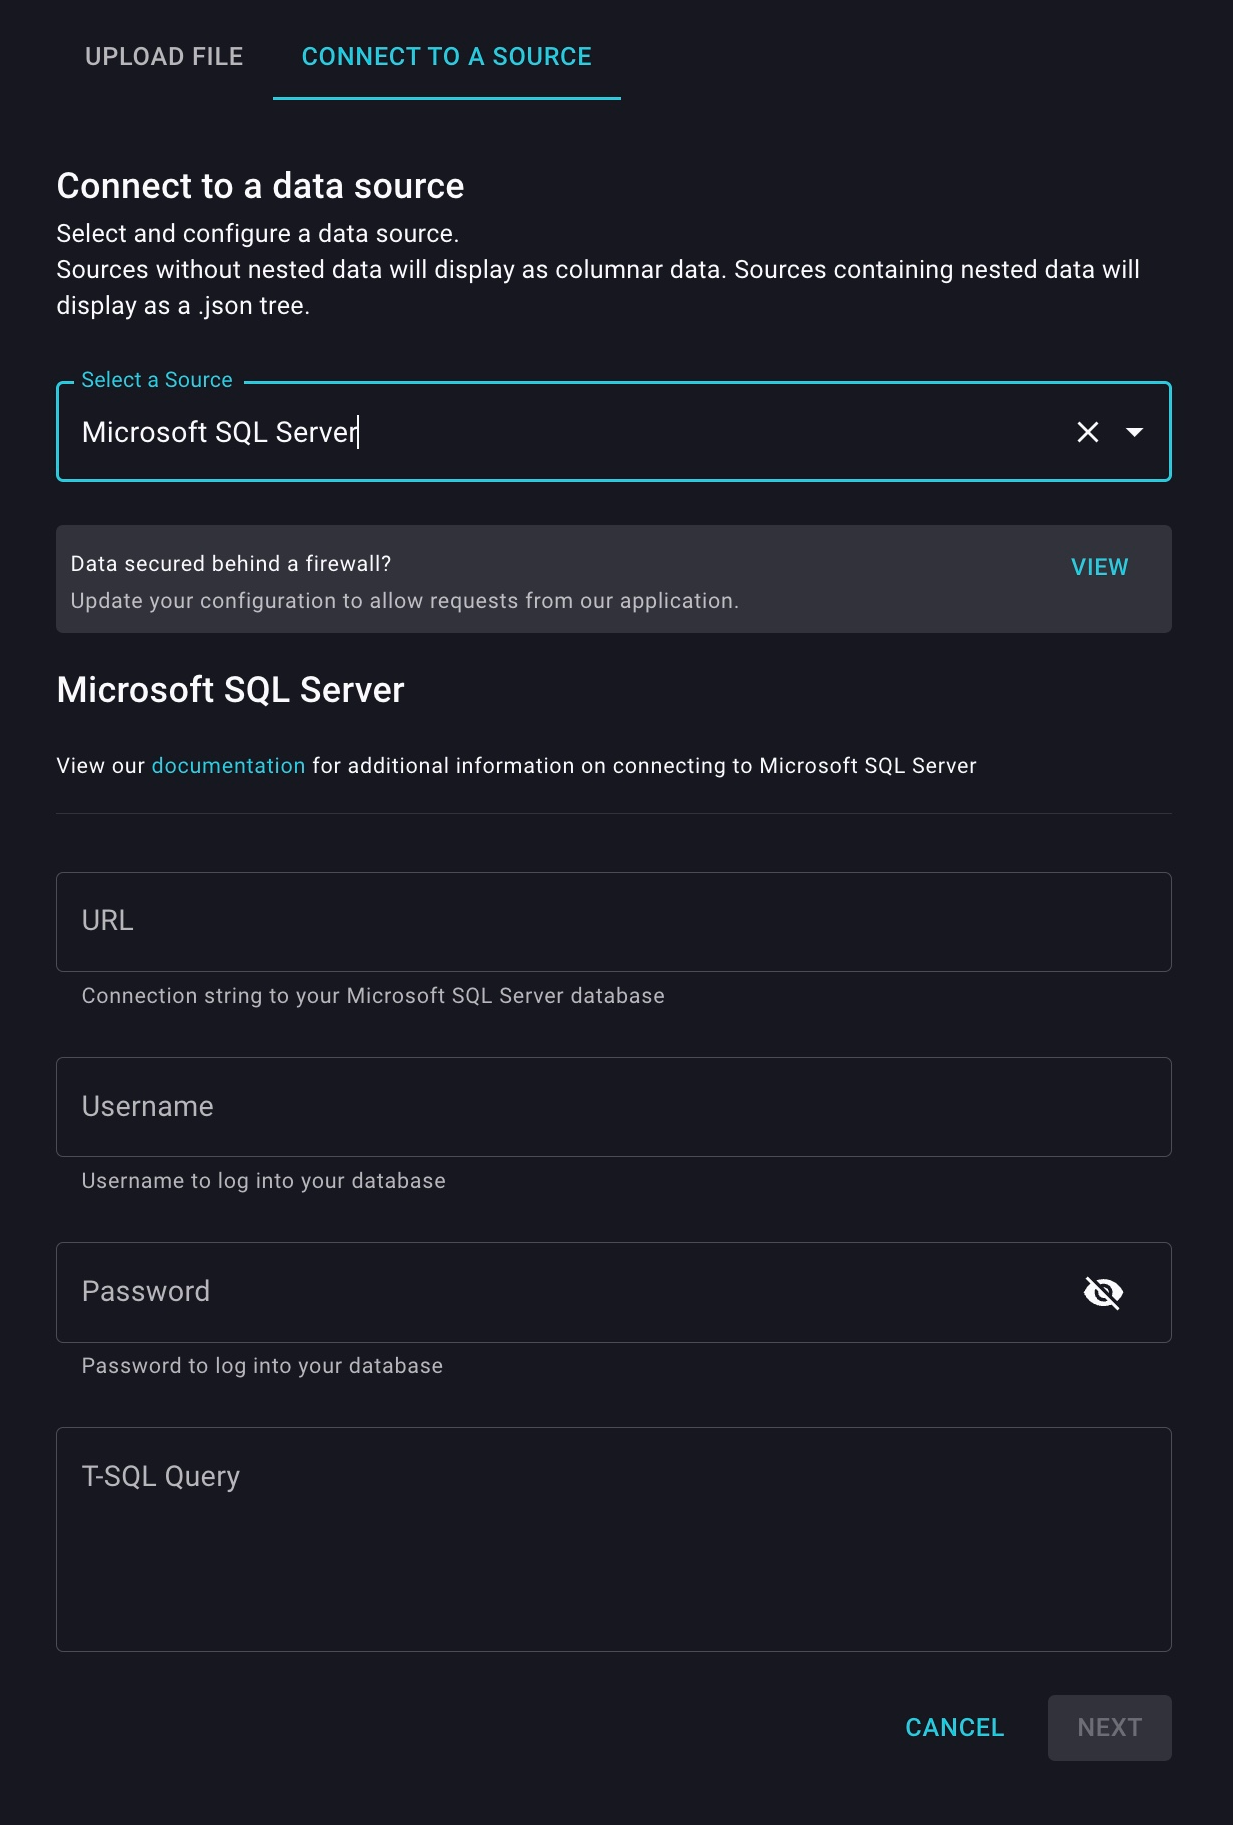 Connect to Microsoft SQL Server